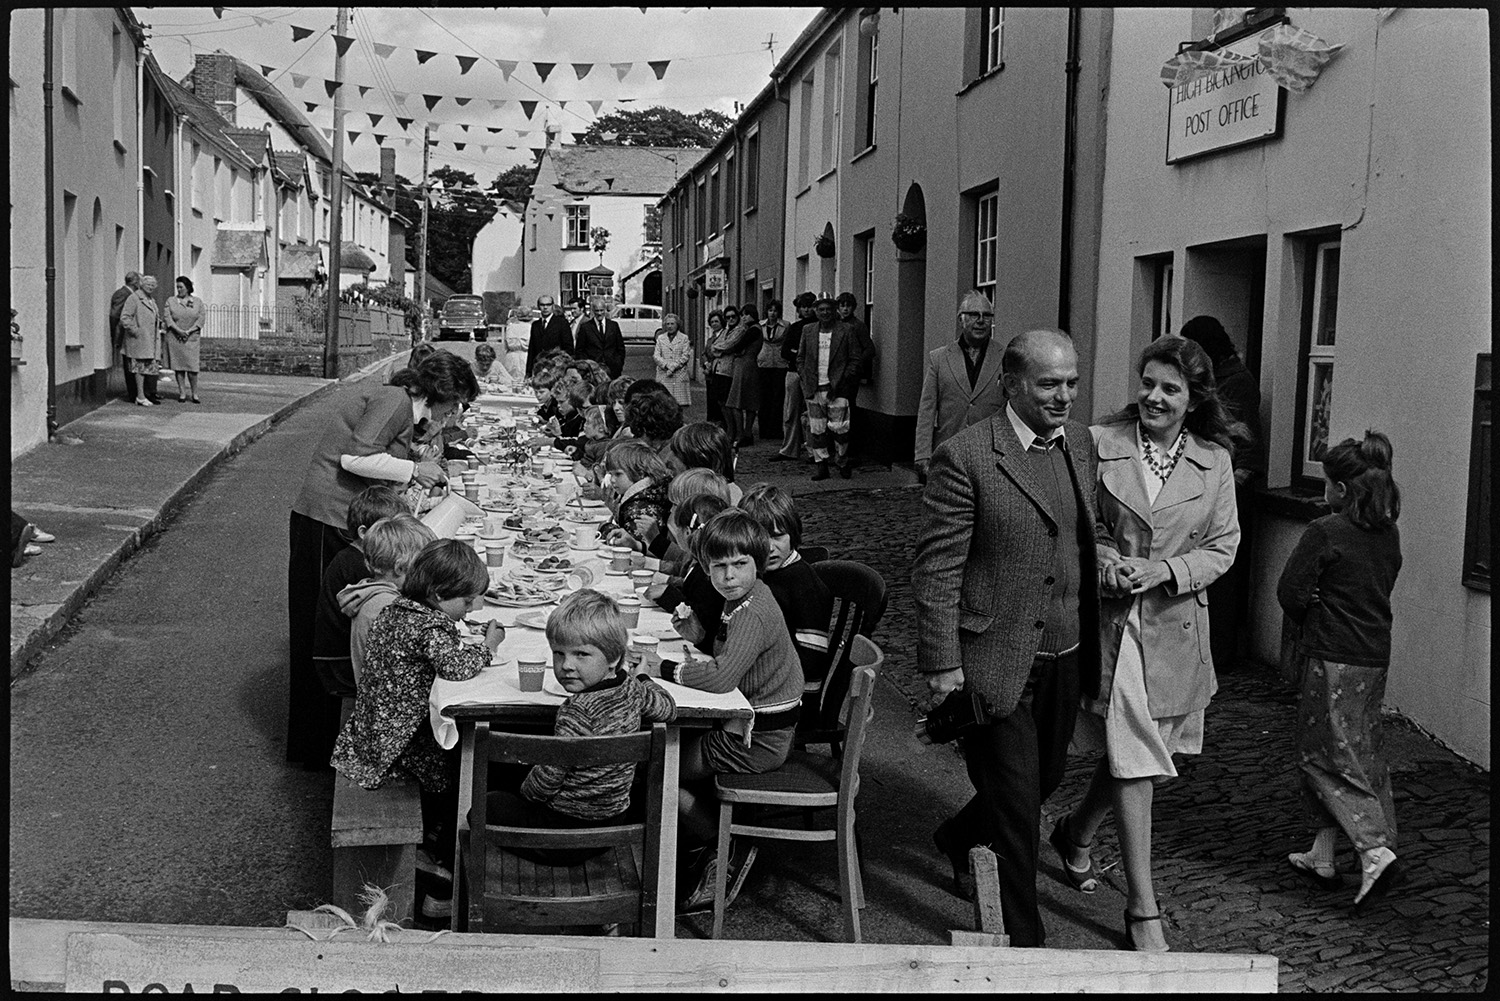 Children's tea in village street, Jubilee Day. 
[Children sat a trestle tables having tea in the street outside High Bickington Post Office to celebrate the Silver Jubilee of Queen Elizabeth II. The street is decorated with bunting and people are walking past.]